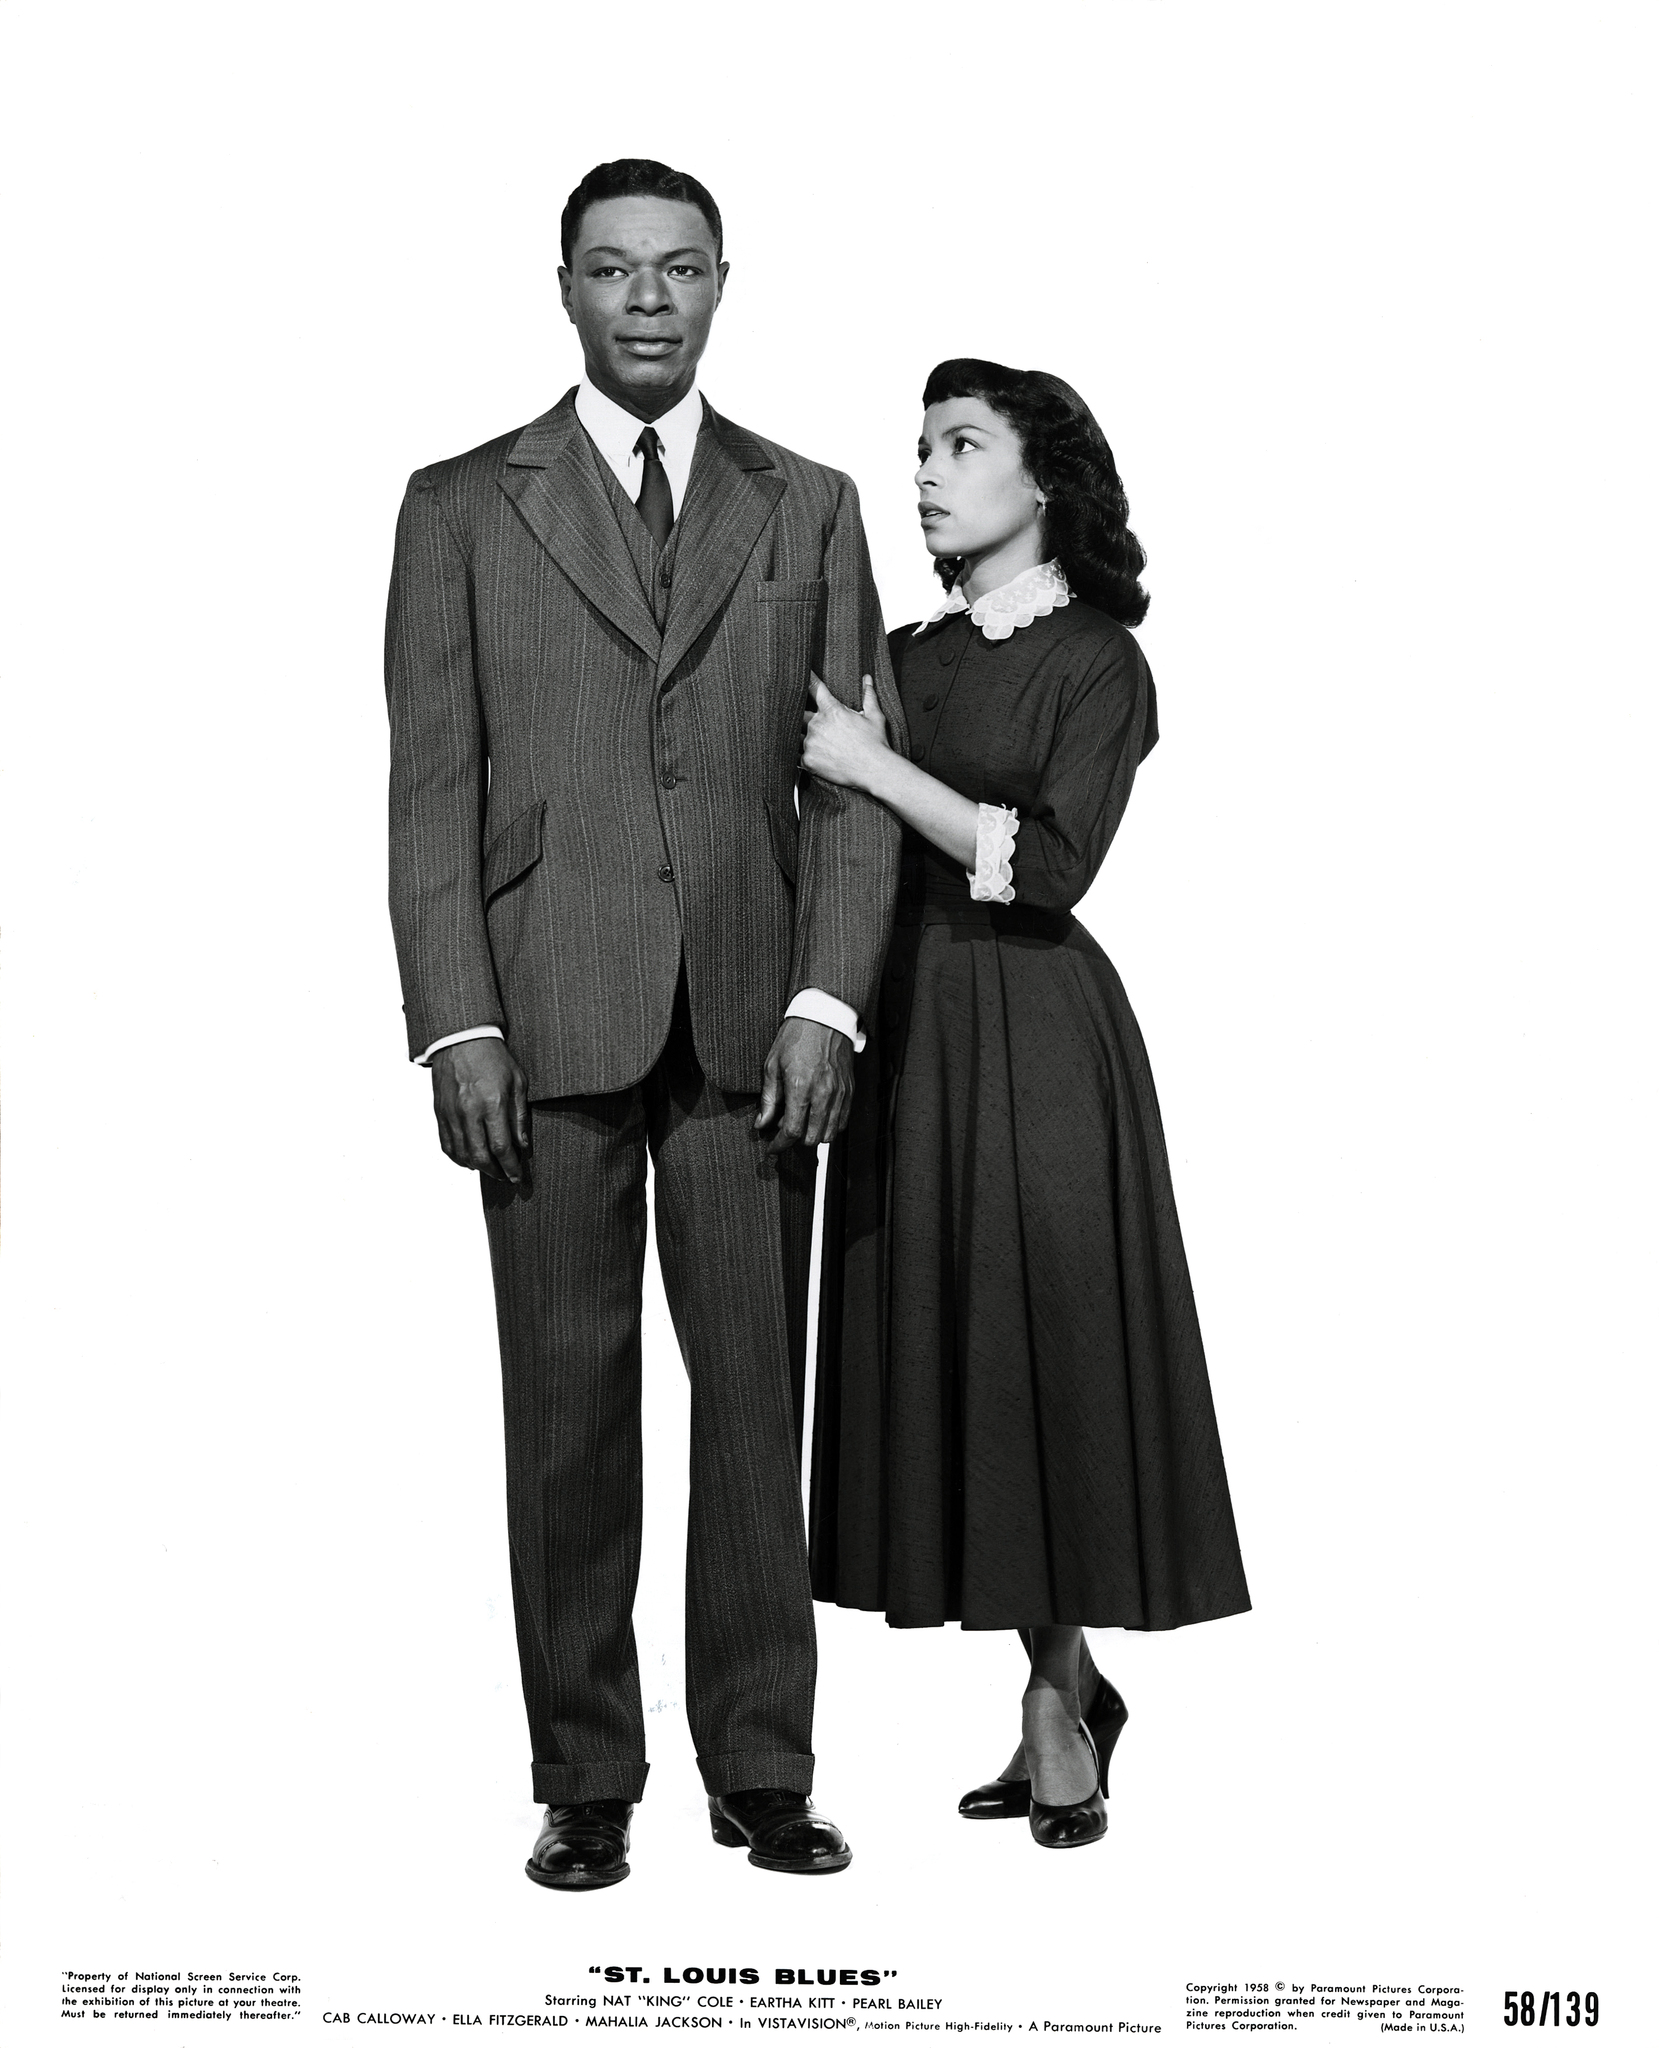 Publicity still portrait of American singer and musician Nat King Cole and actress Ruby Dee in the WC Handy musical biographical film 'St. Louis Blues' (Paramount Pictures), Memphis, Tennessee, 1958.